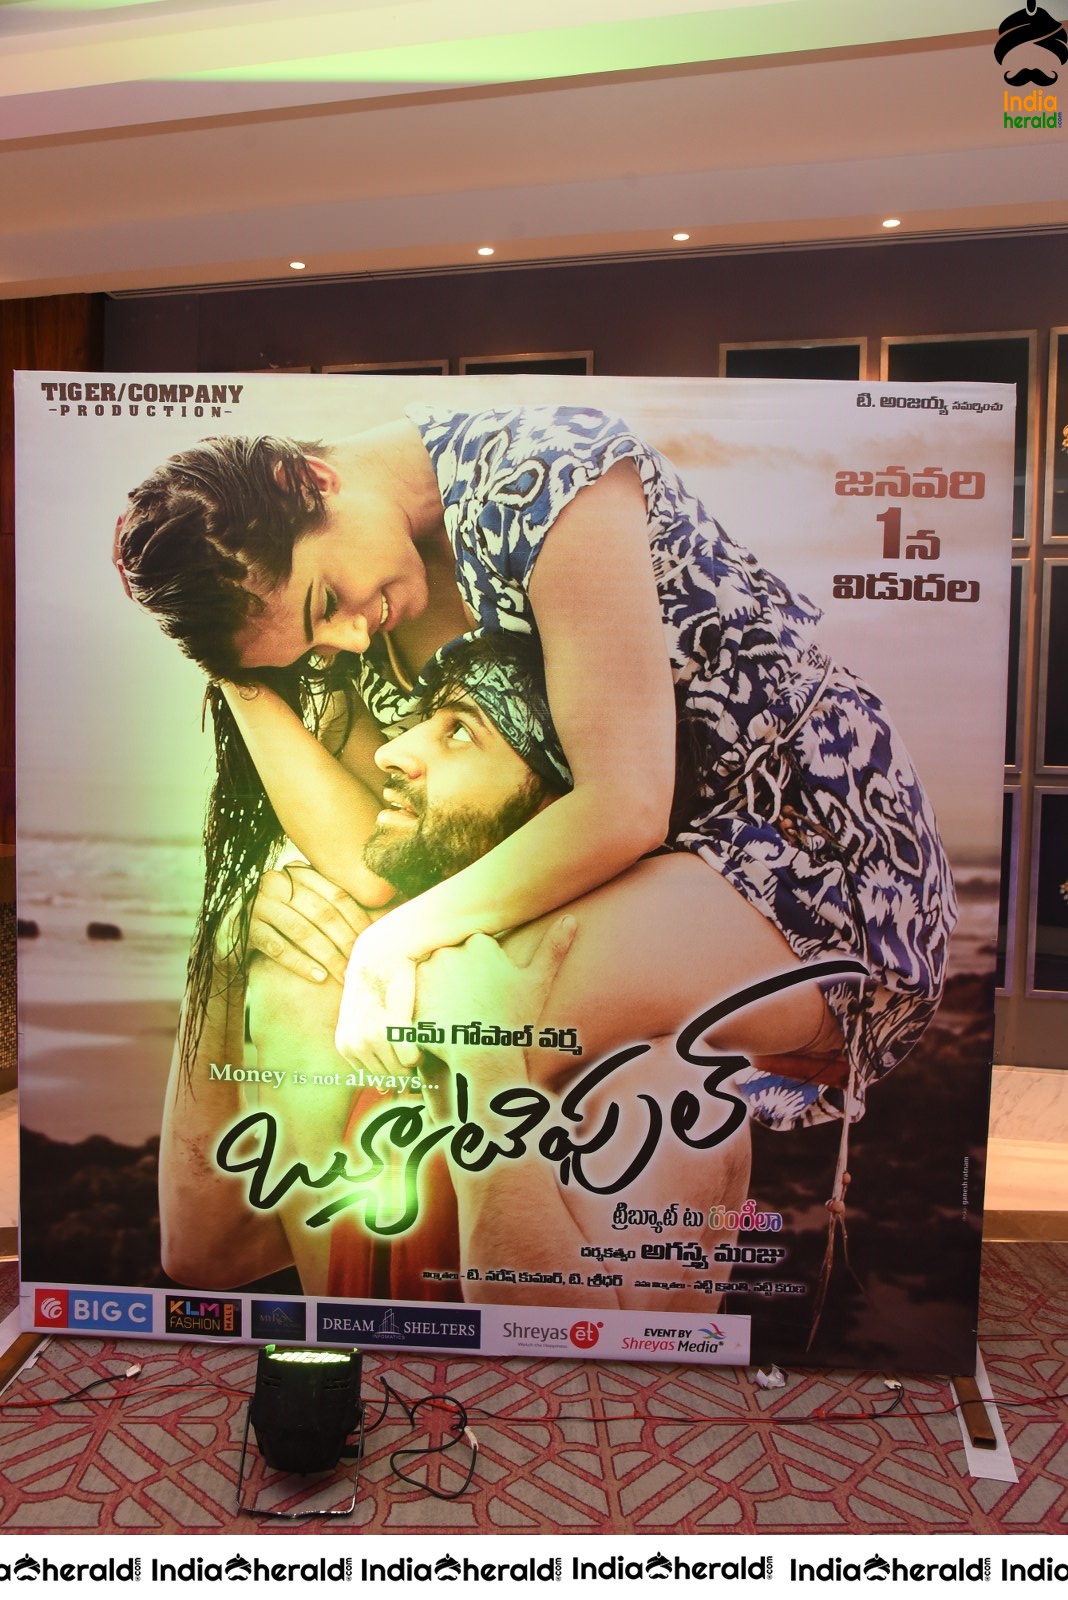 Hoardings placed at Beautiful Movie Event